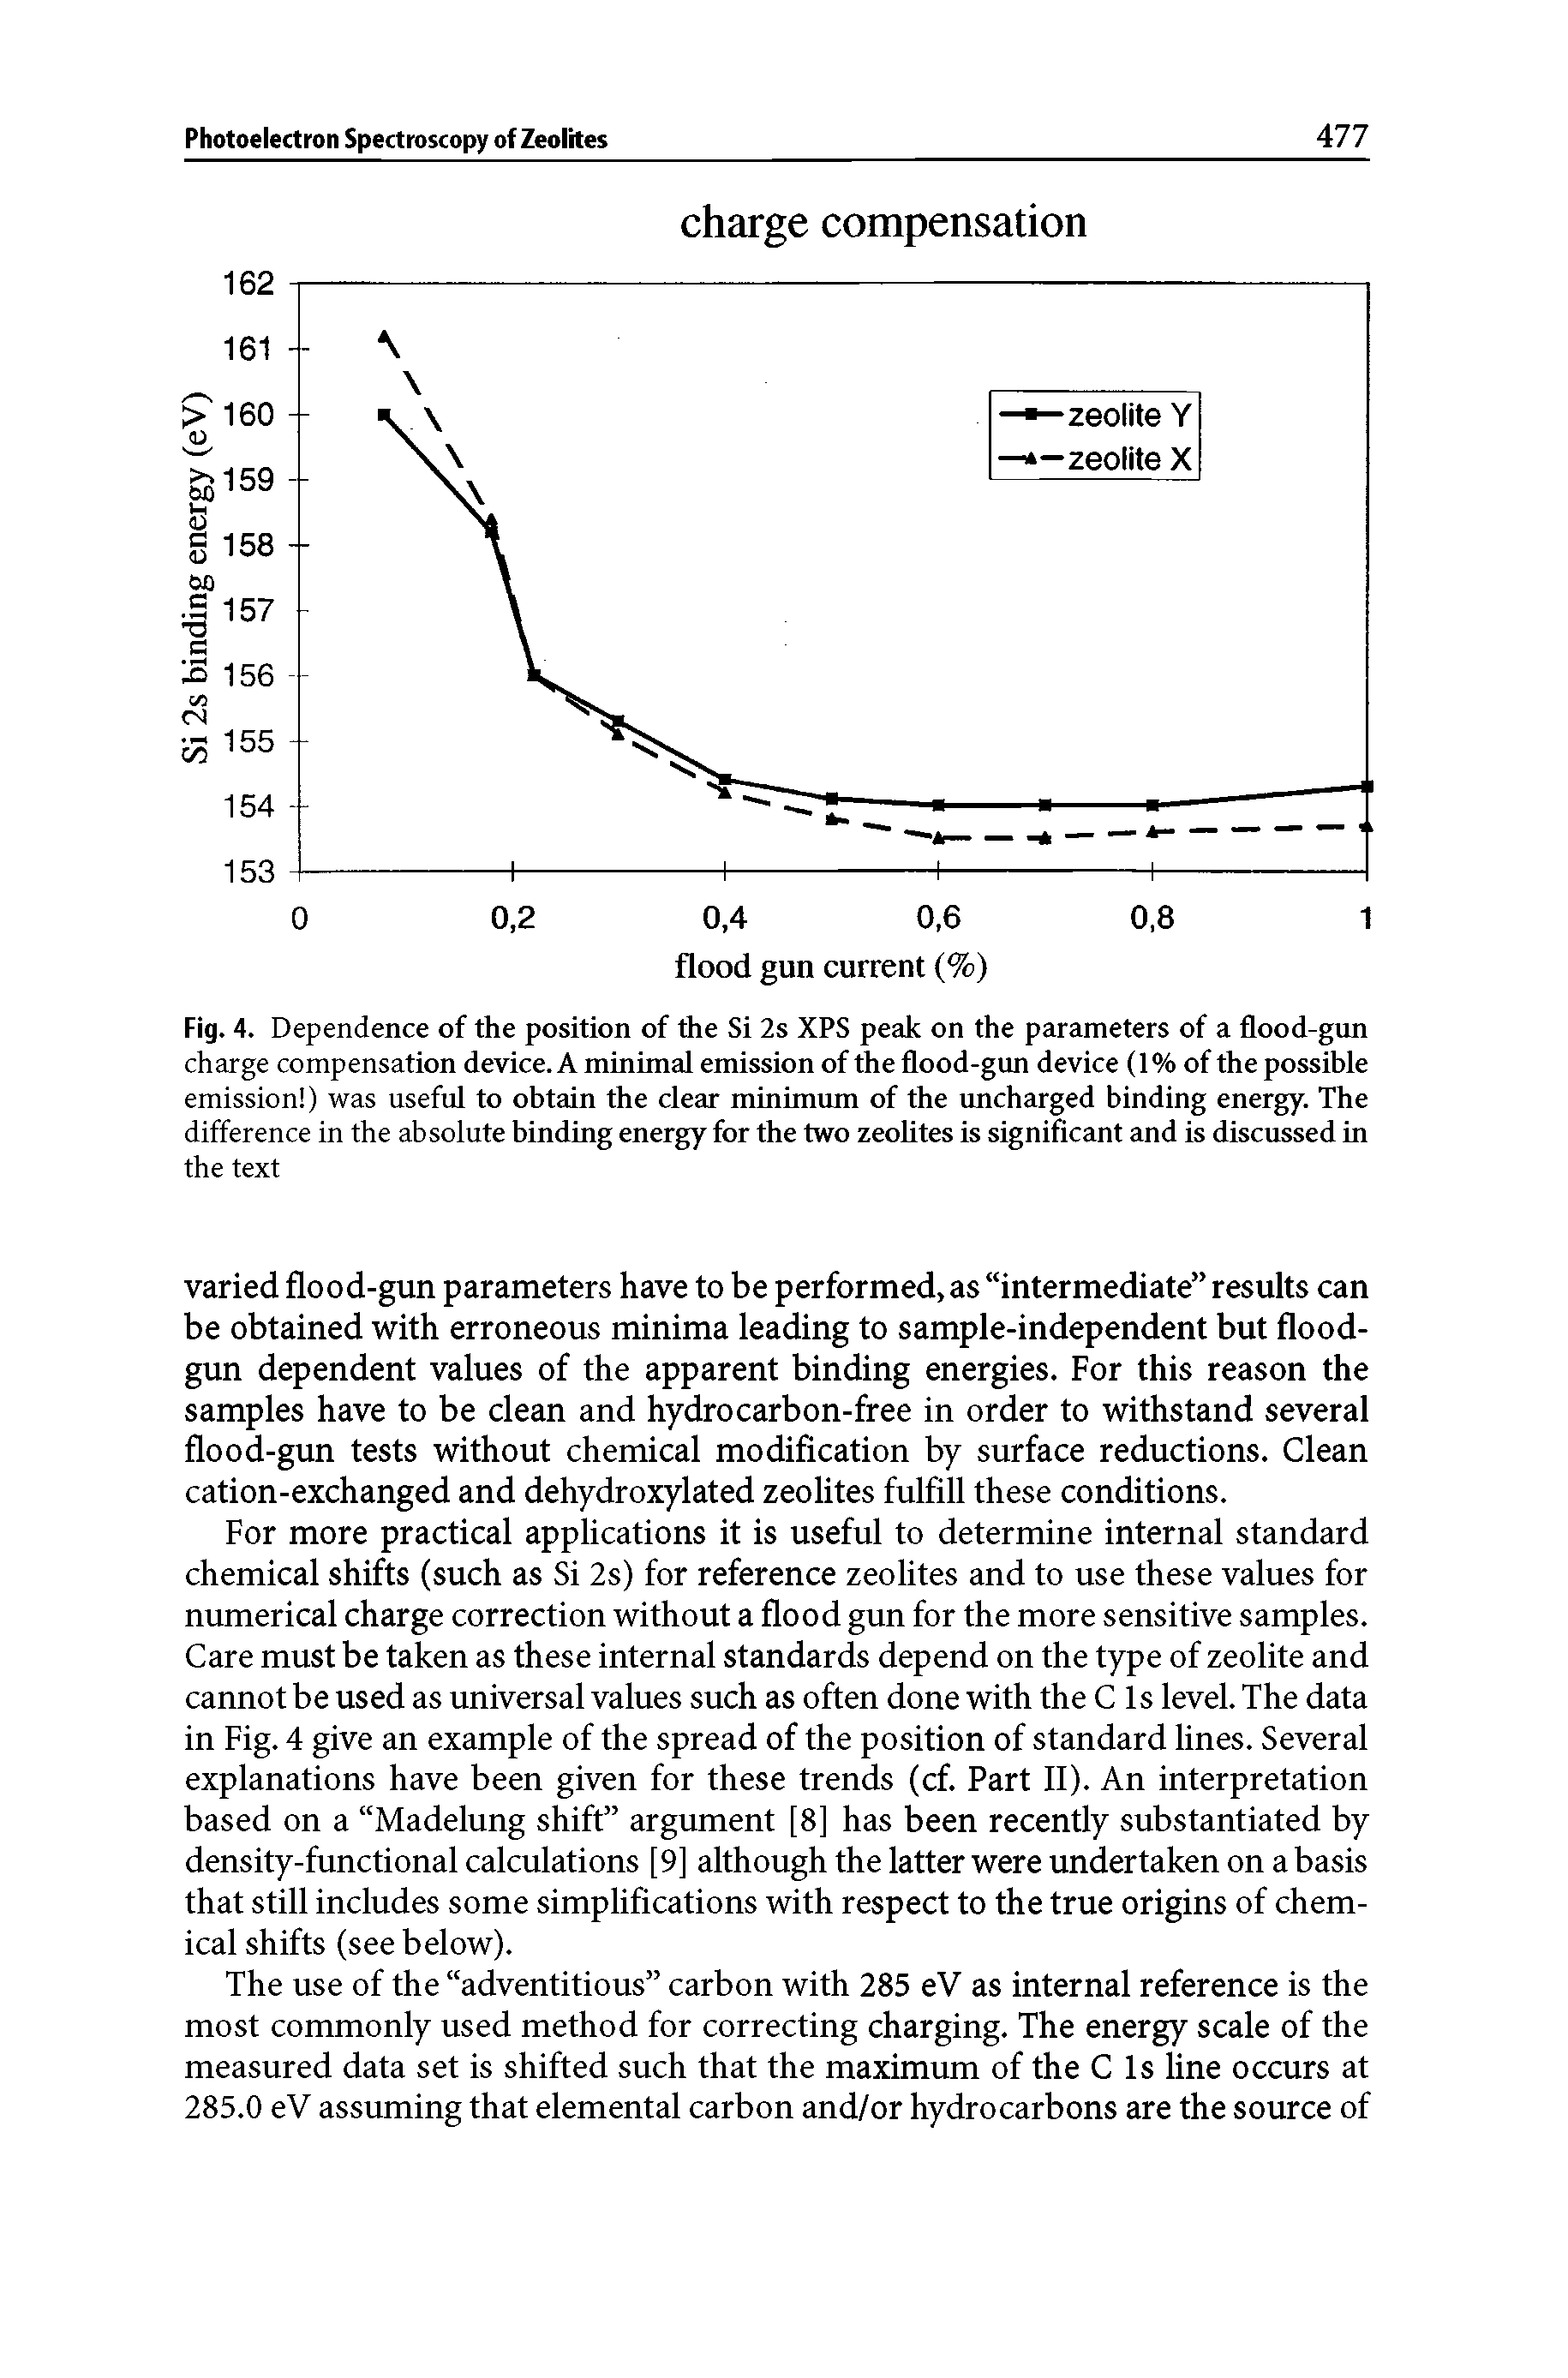 Fig. 4. Dependence of the position of the Si 2s XPS peak on the parameters of a flood-gun charge compensation device. A minimal emission of the flood-gun device (1% of the possible emission ) was useful to obtain the clear minimum of the uncharged binding energy. The difference in the absolute binding energy for the two zeolites is significant and is discussed in the text...